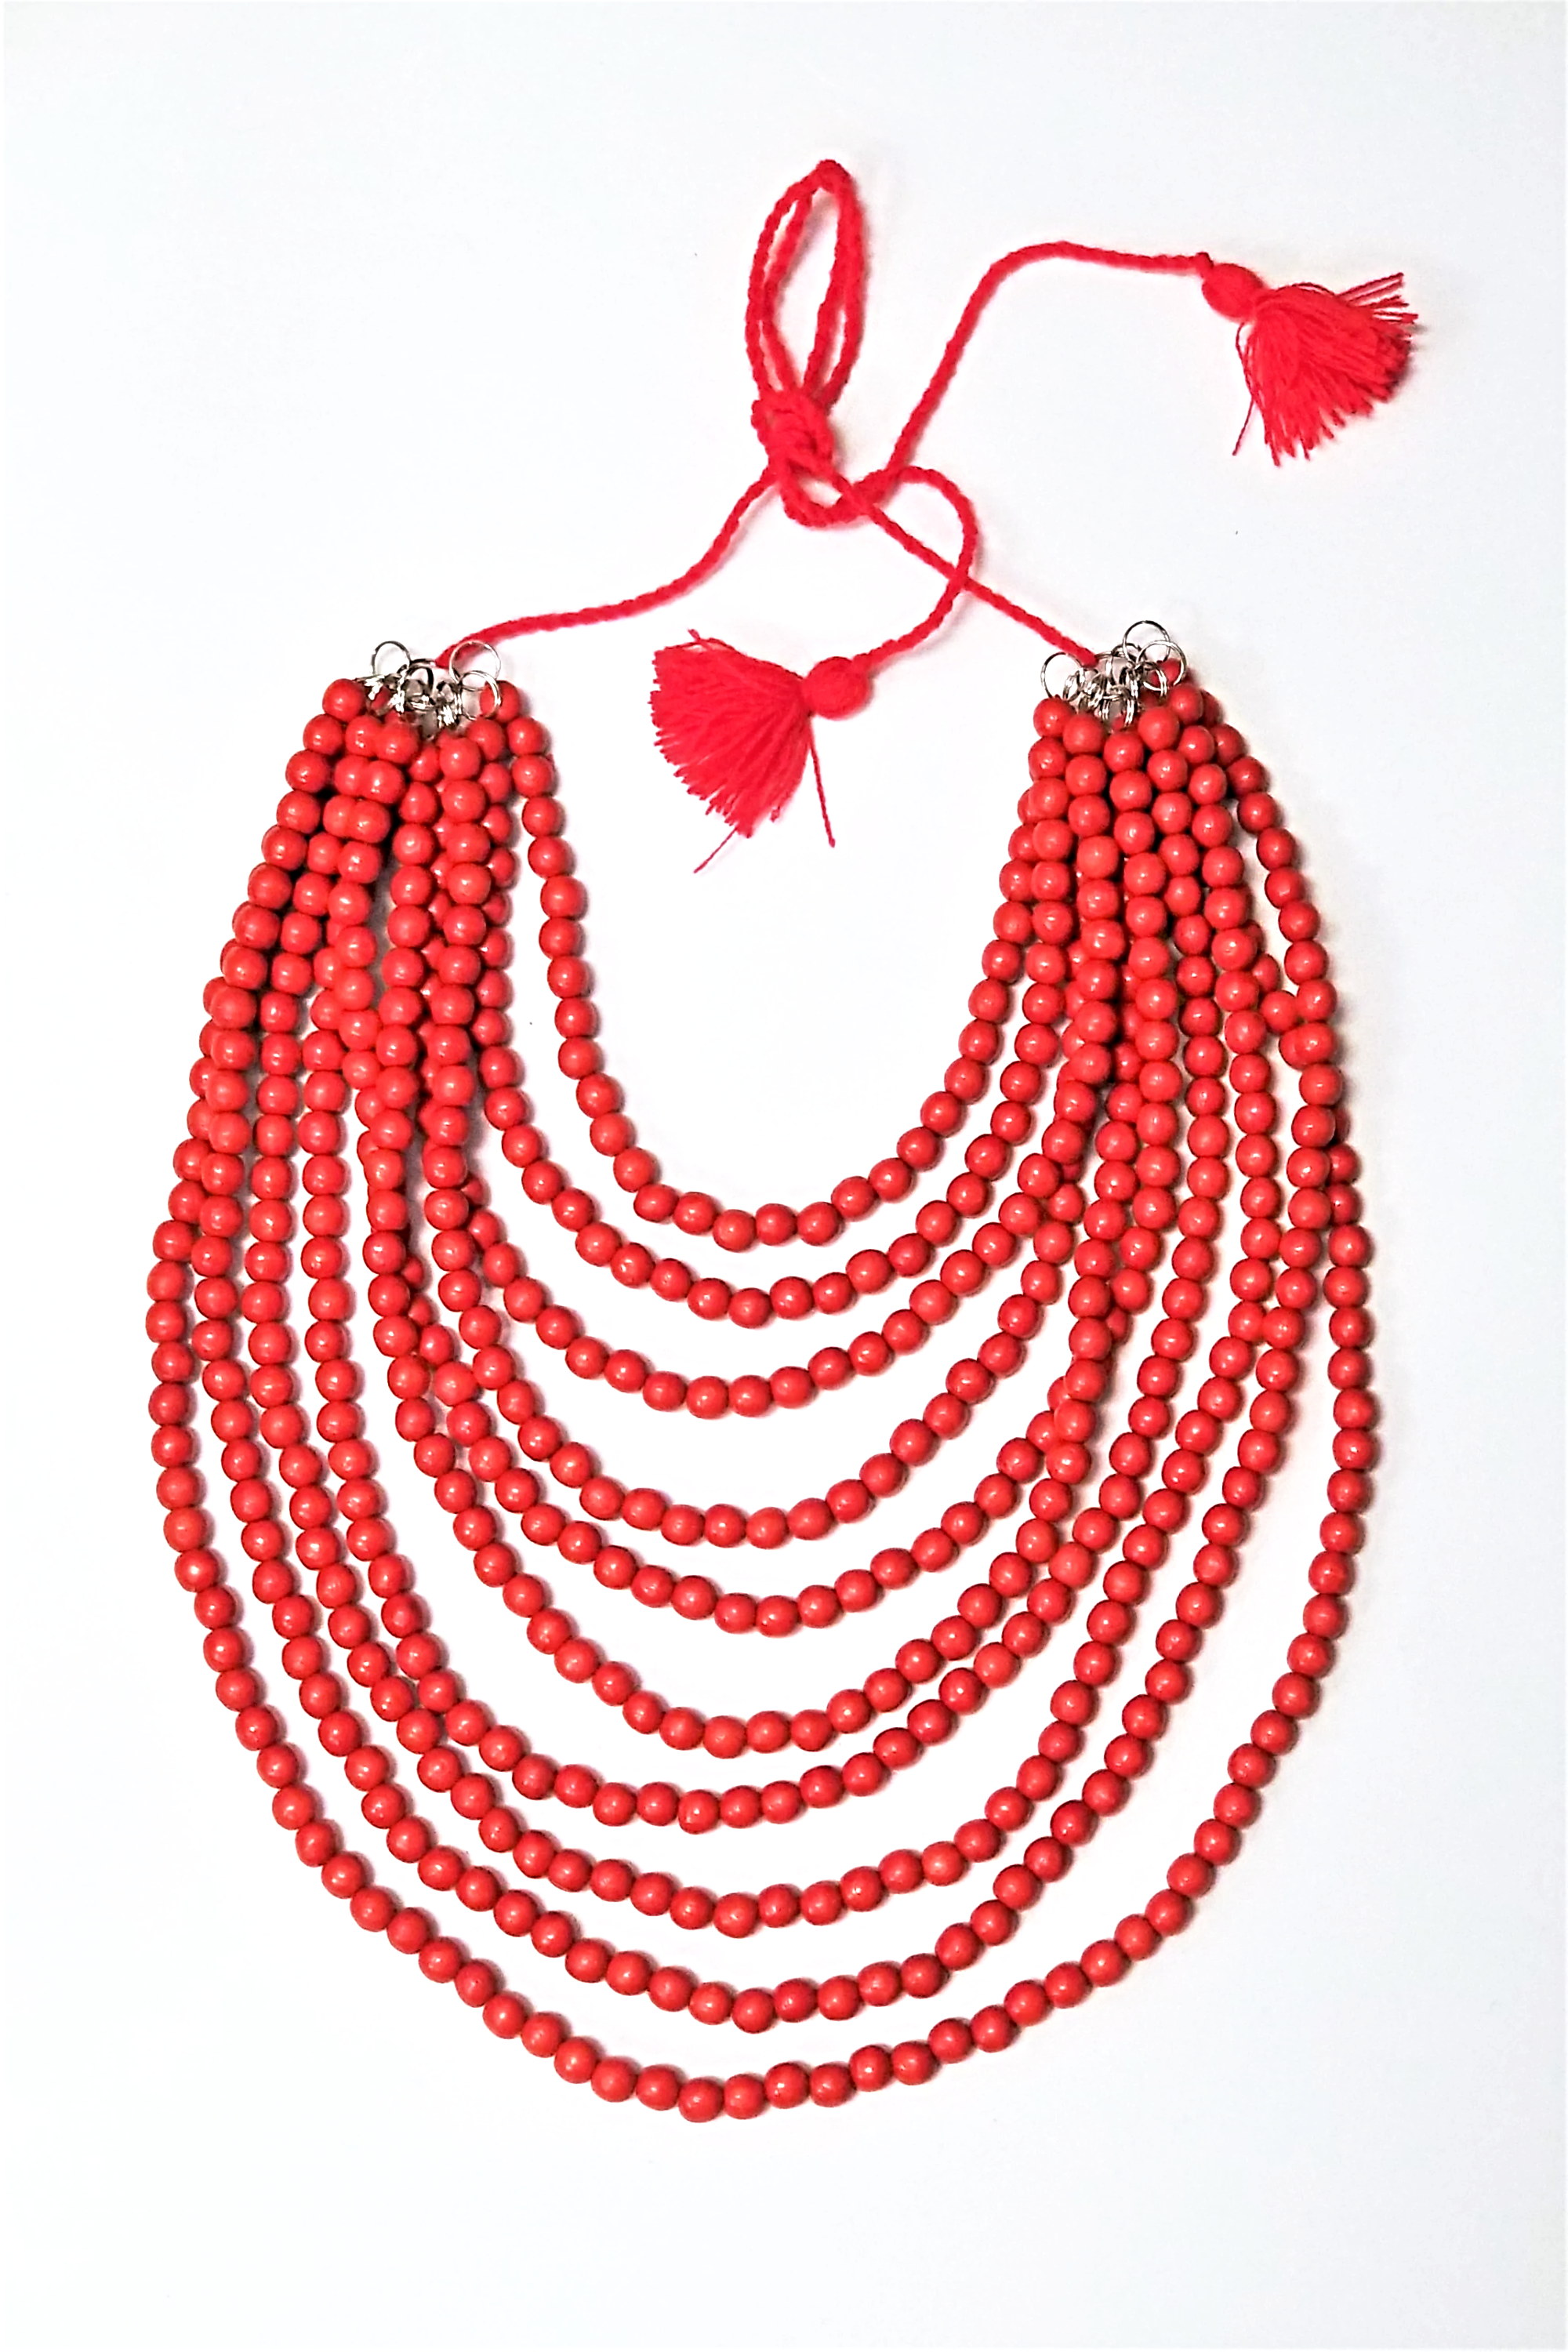 Artisan crafted wooden bead 10-strand necklace. Red